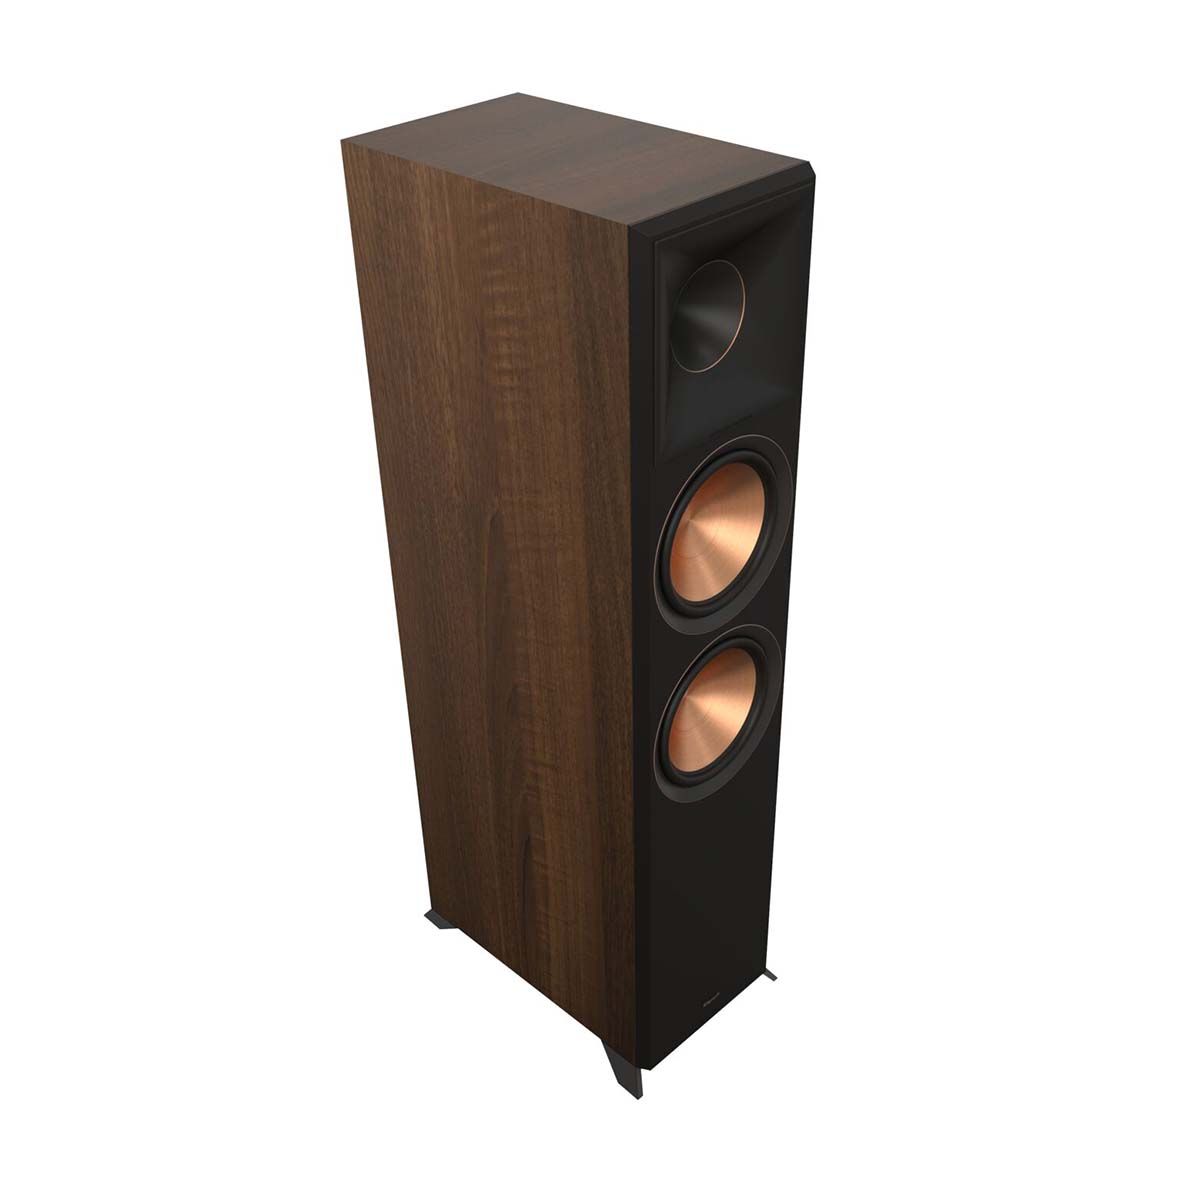 Klipsch RP-8000F II Floorstanding Speaker - Walnut - angled front view without grill